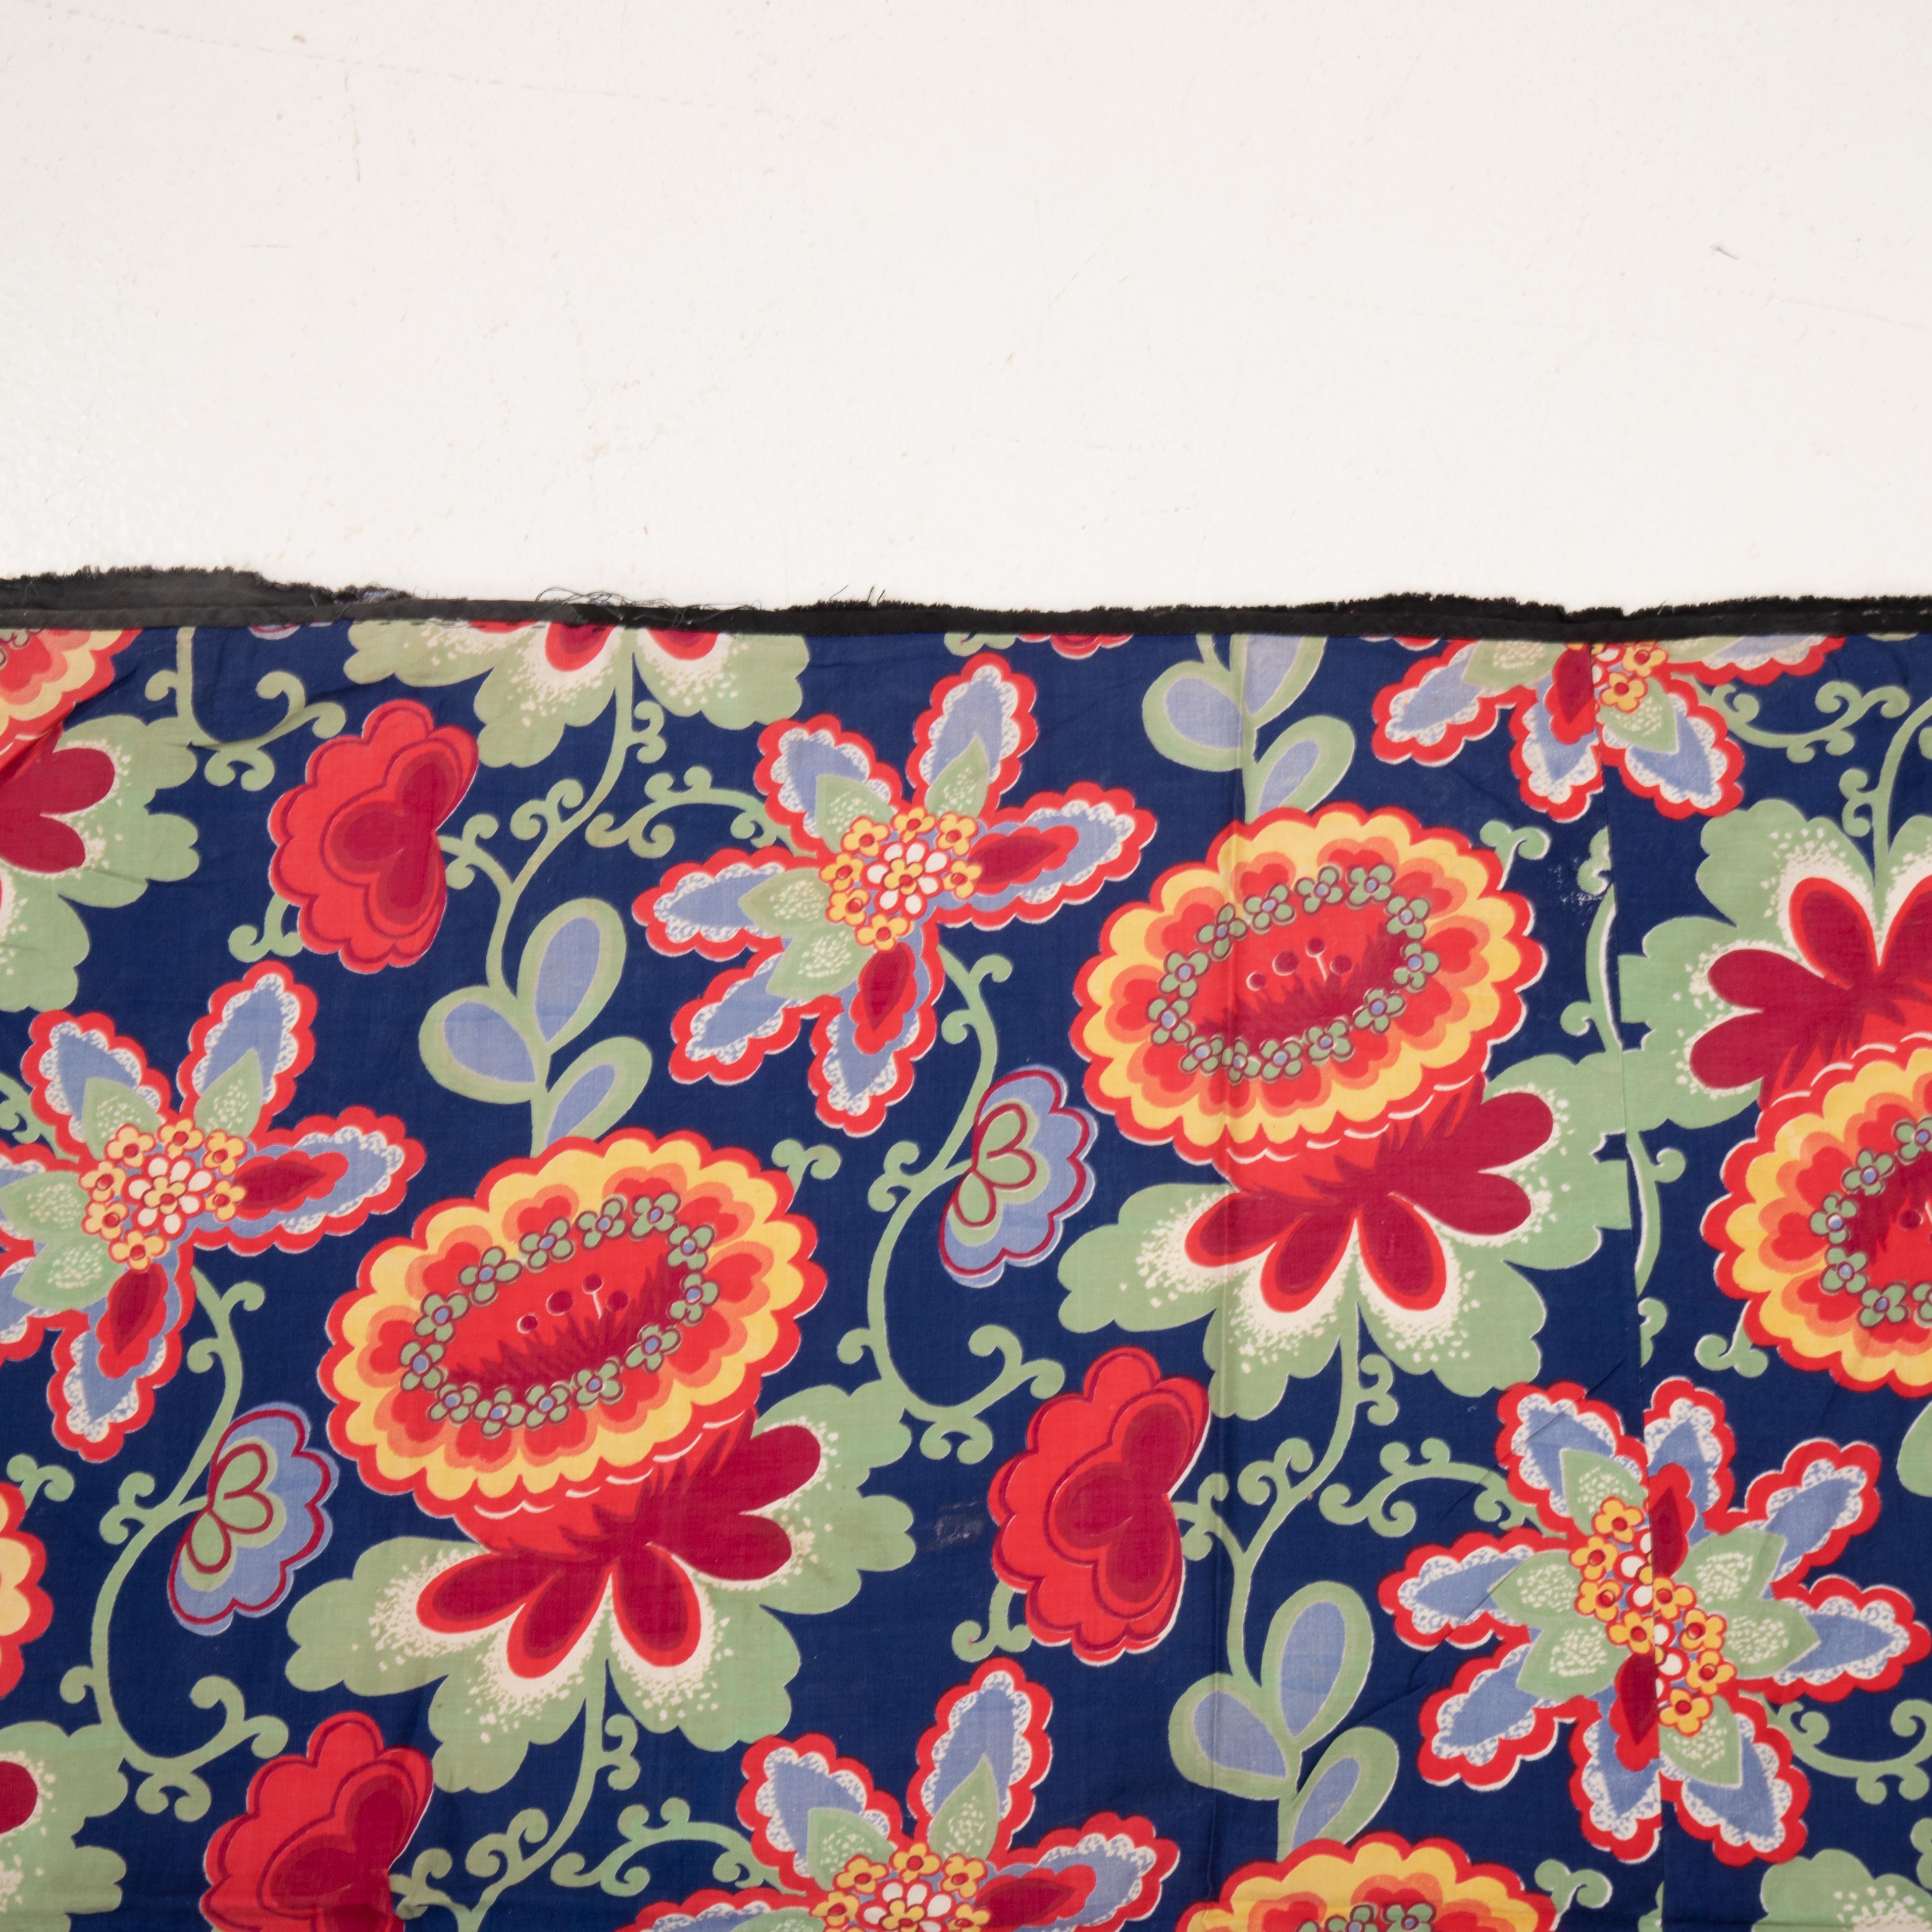 Roller Printed Cotton Panel, Made for Central Asian Markets  Mid 20th C.  Russia For Sale 1